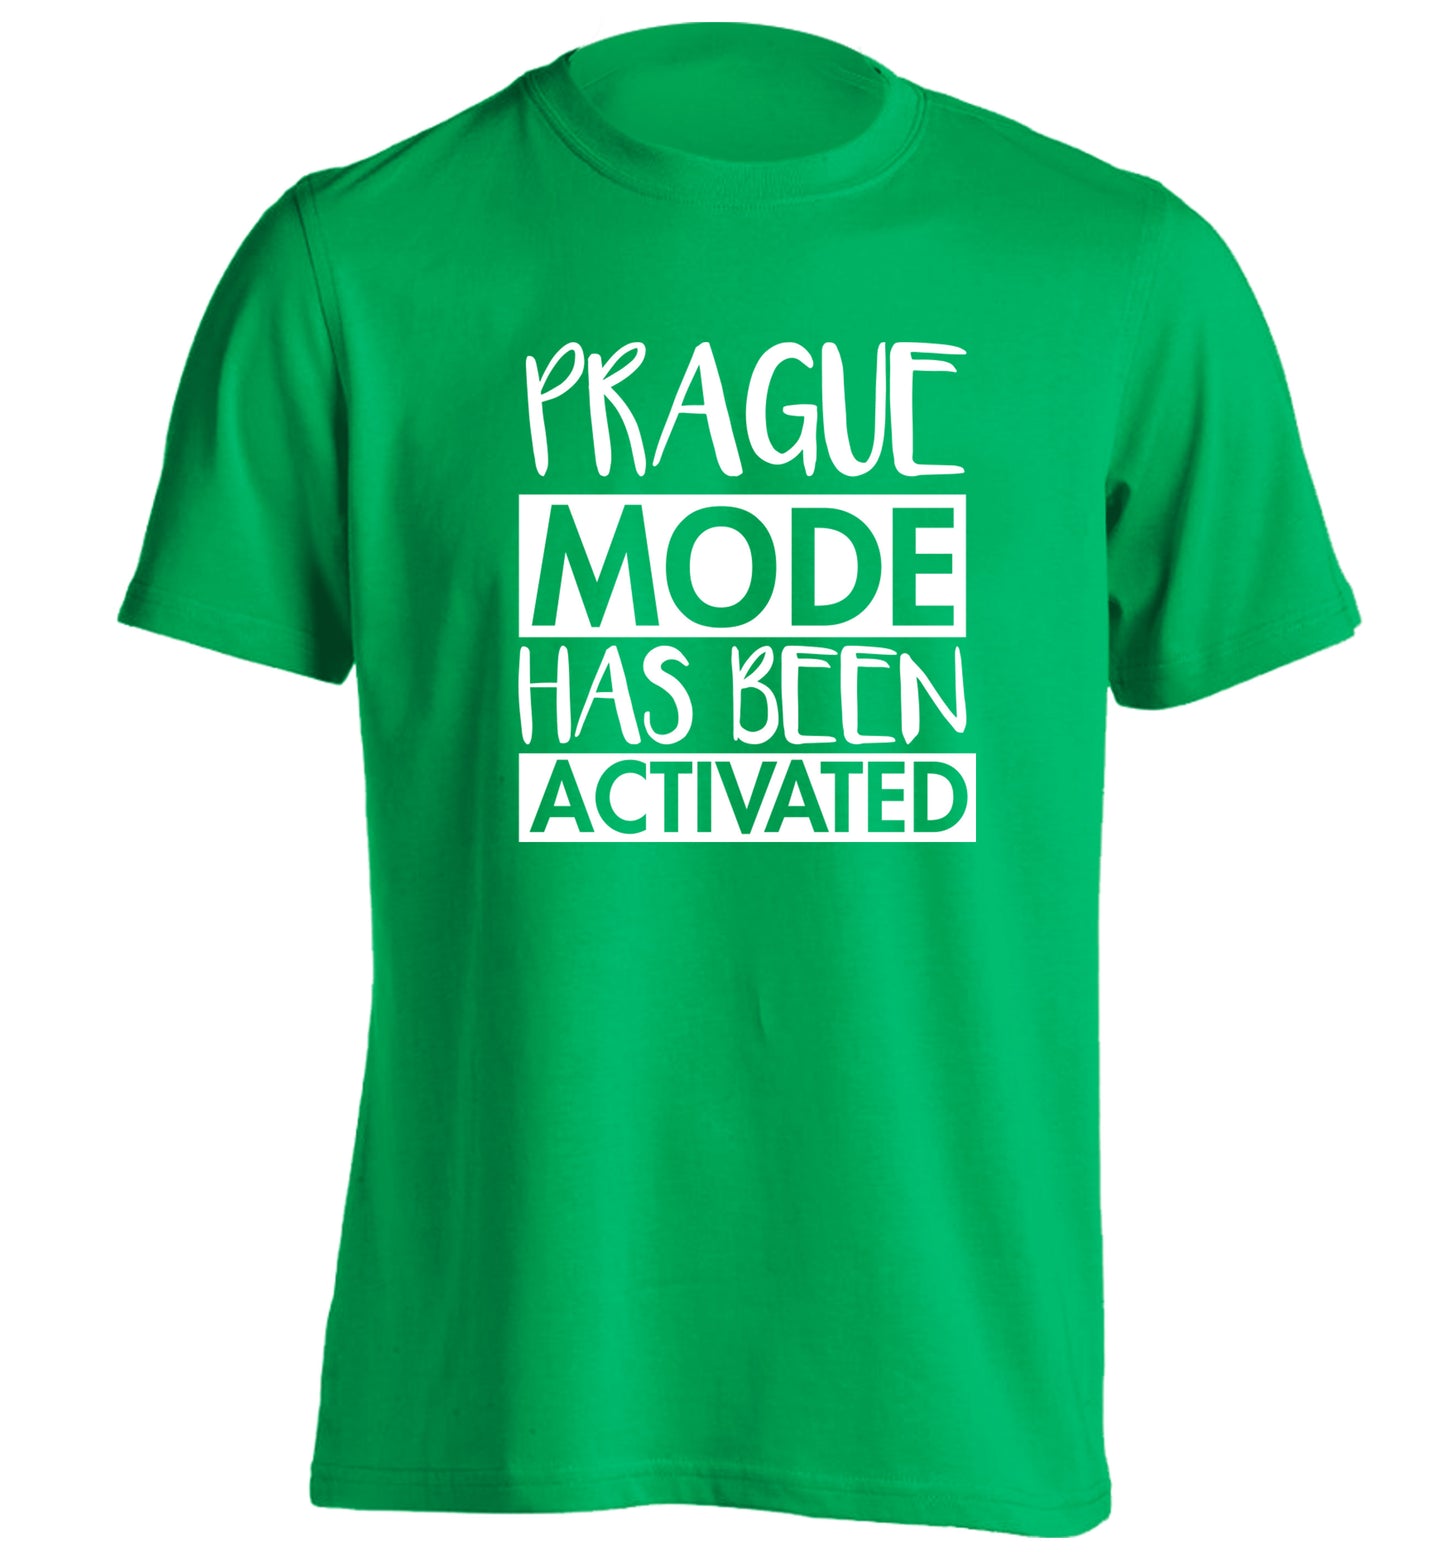 Prague mode has been activated adults unisex green Tshirt 2XL